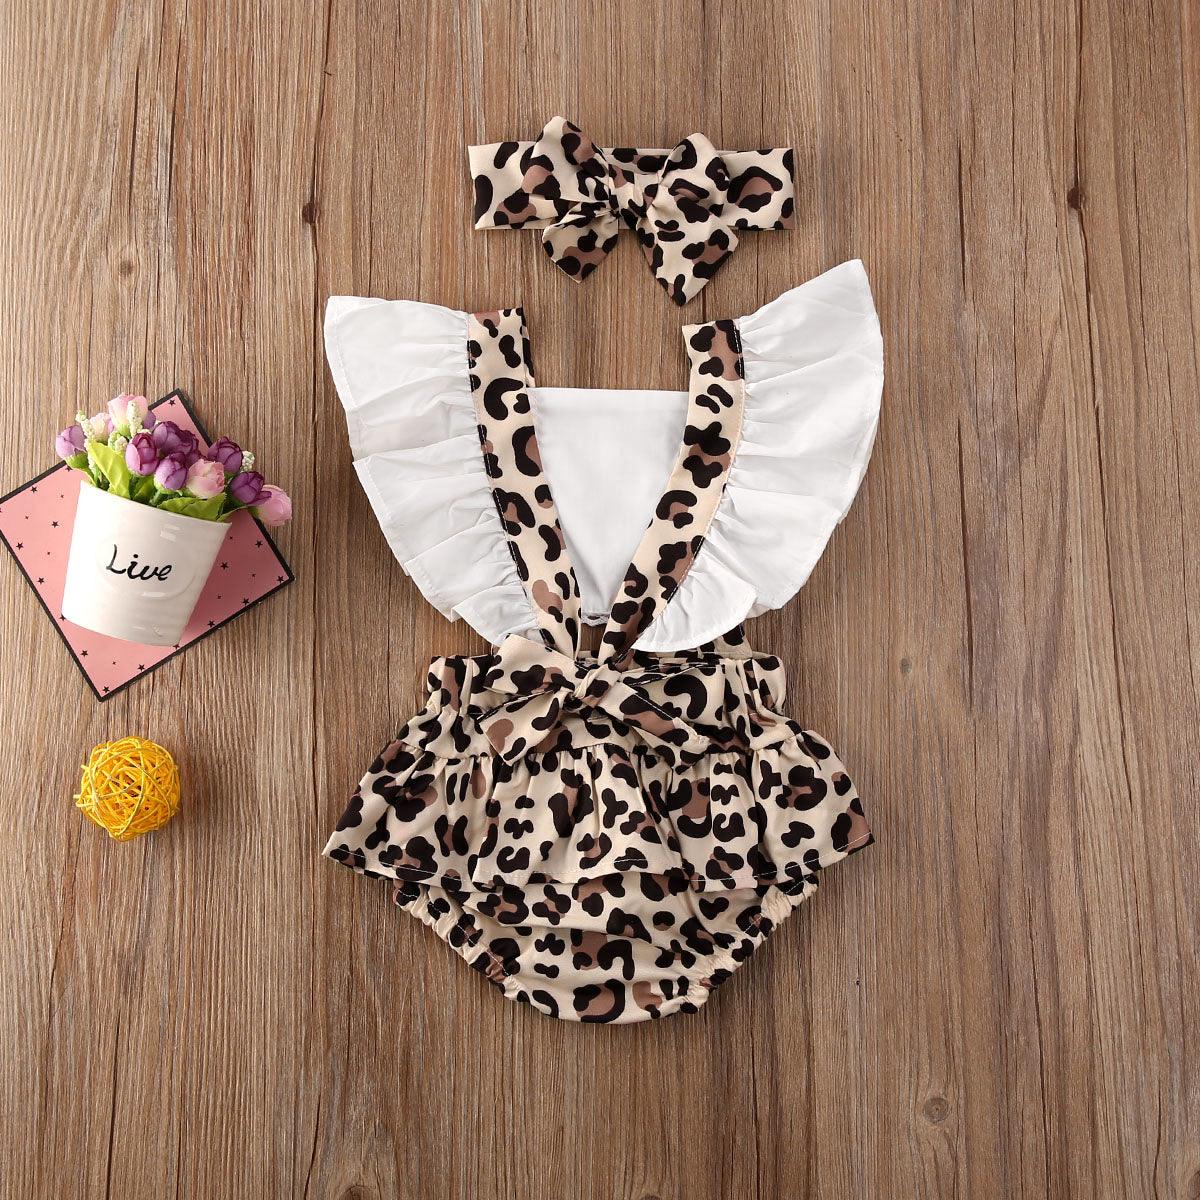 2 Pieces Infant Baby Girl Jumpsuit Clothes Outfits Cute Print 0-24M - HABASH FASHION